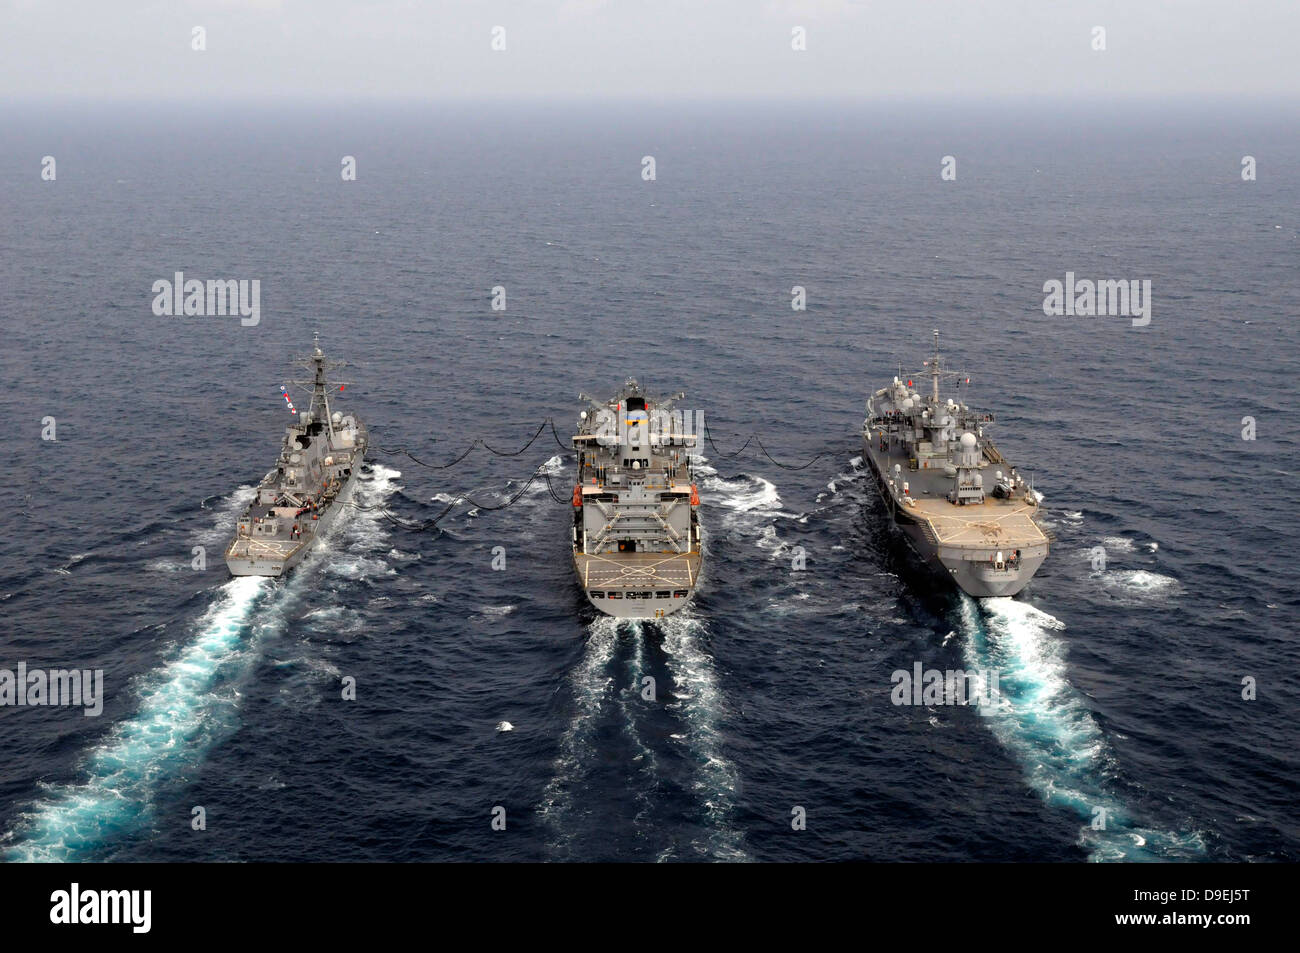 Military ships conduct an underway replenishment in the Pacific Ocean. Stock Photo